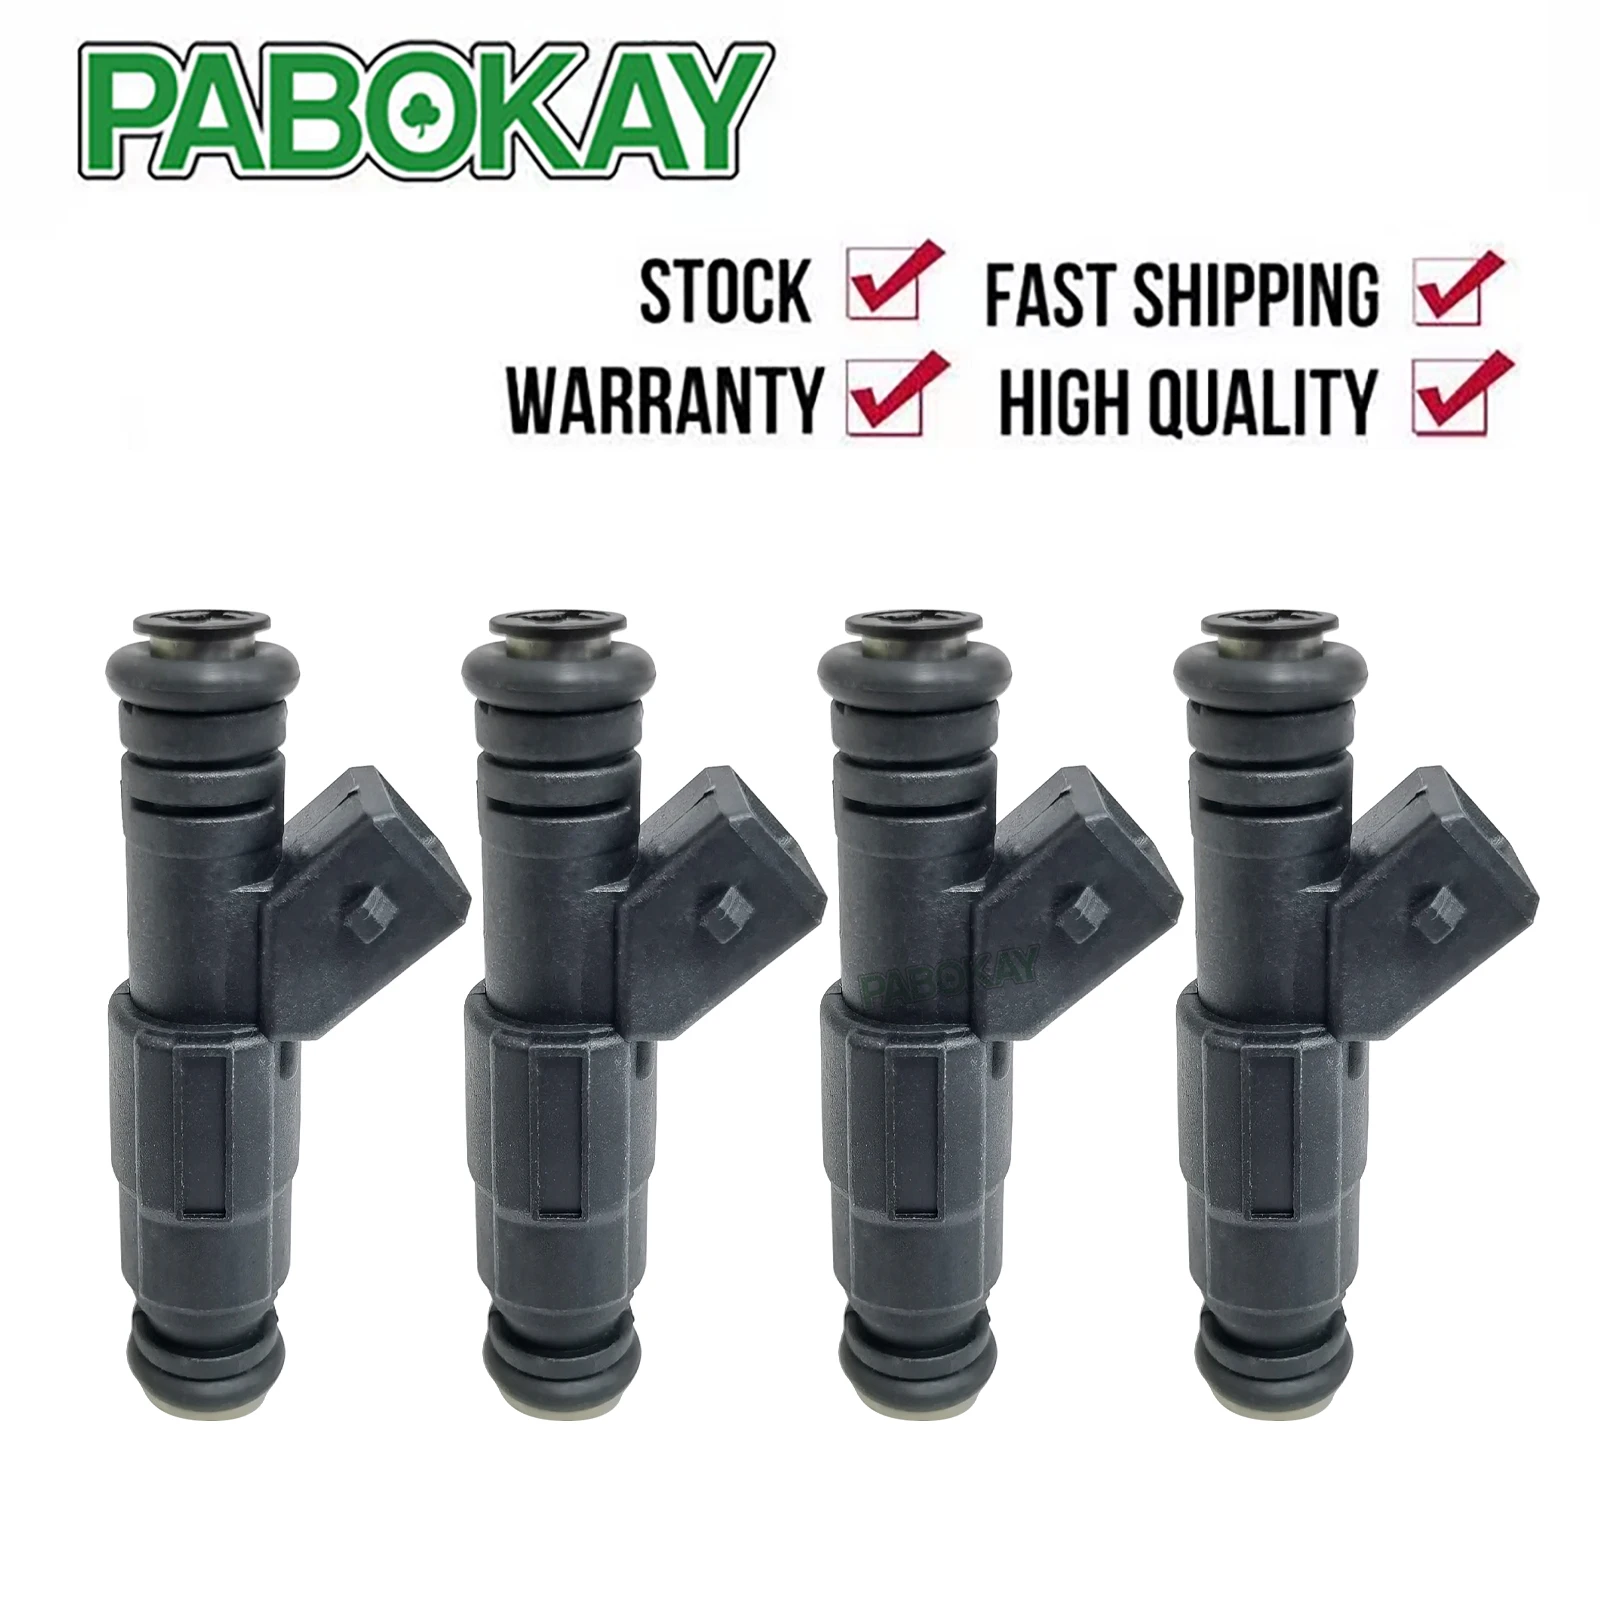 

4 pieces x Fuel Injector 0280155884 17113221 17109596 35175728 For Chevrolet GMC 7.4L 1996-2000